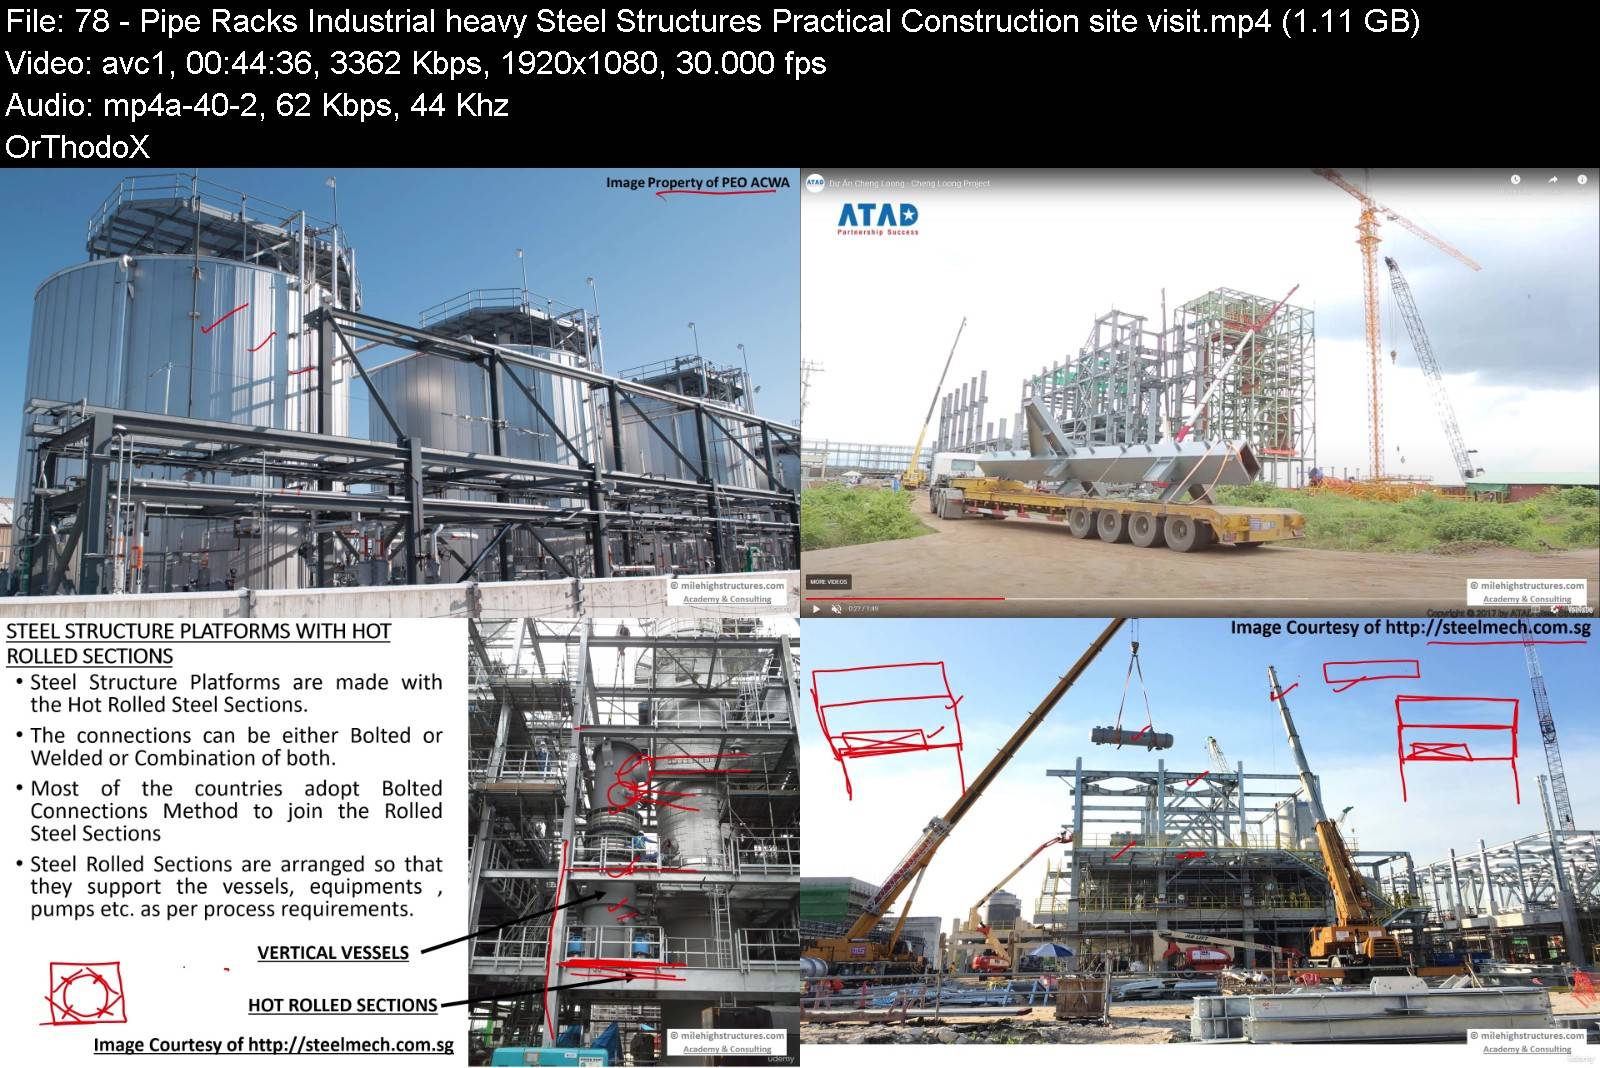 _how_buildings_are_constructed_rcc_steel_composite.jpg